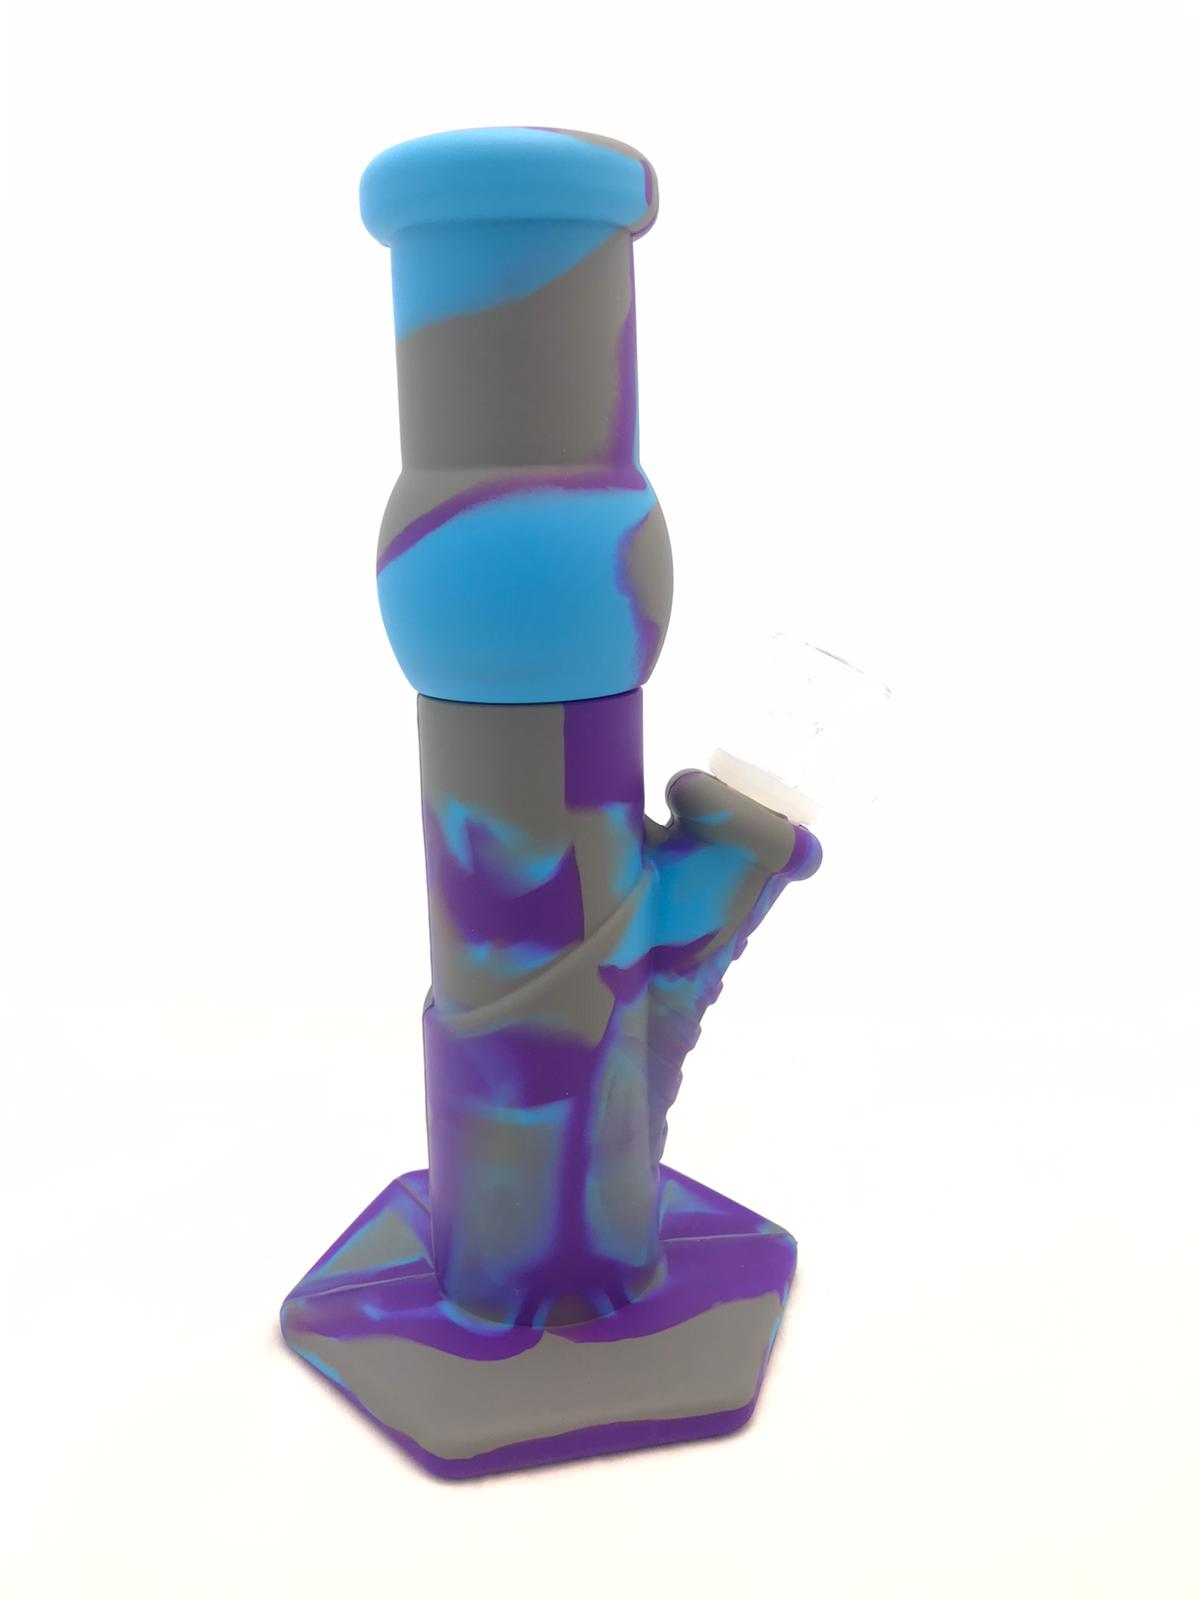 Silicon tall bong colors BLUE/GREY